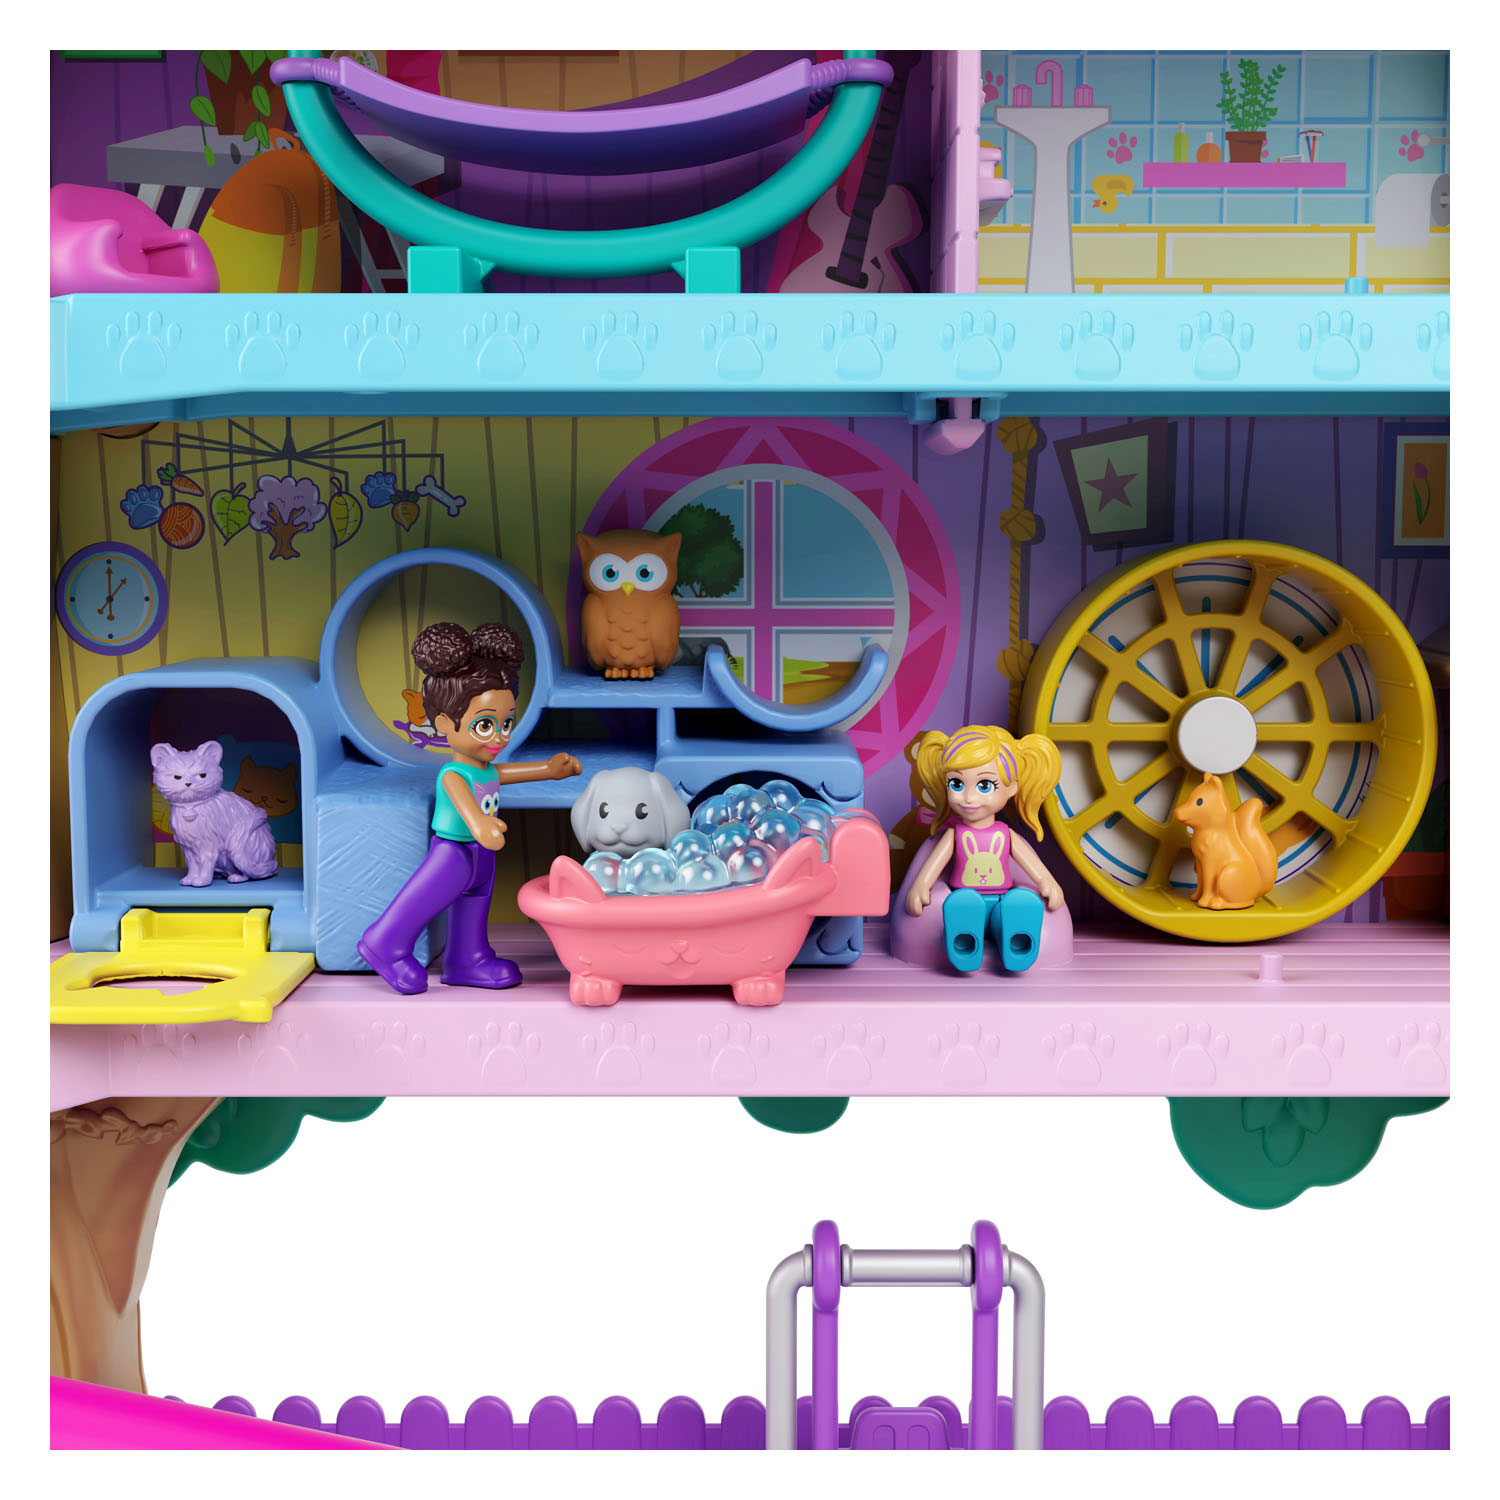 Polly Pocket – Pollyville Haustier-Baumhaus-Spielset